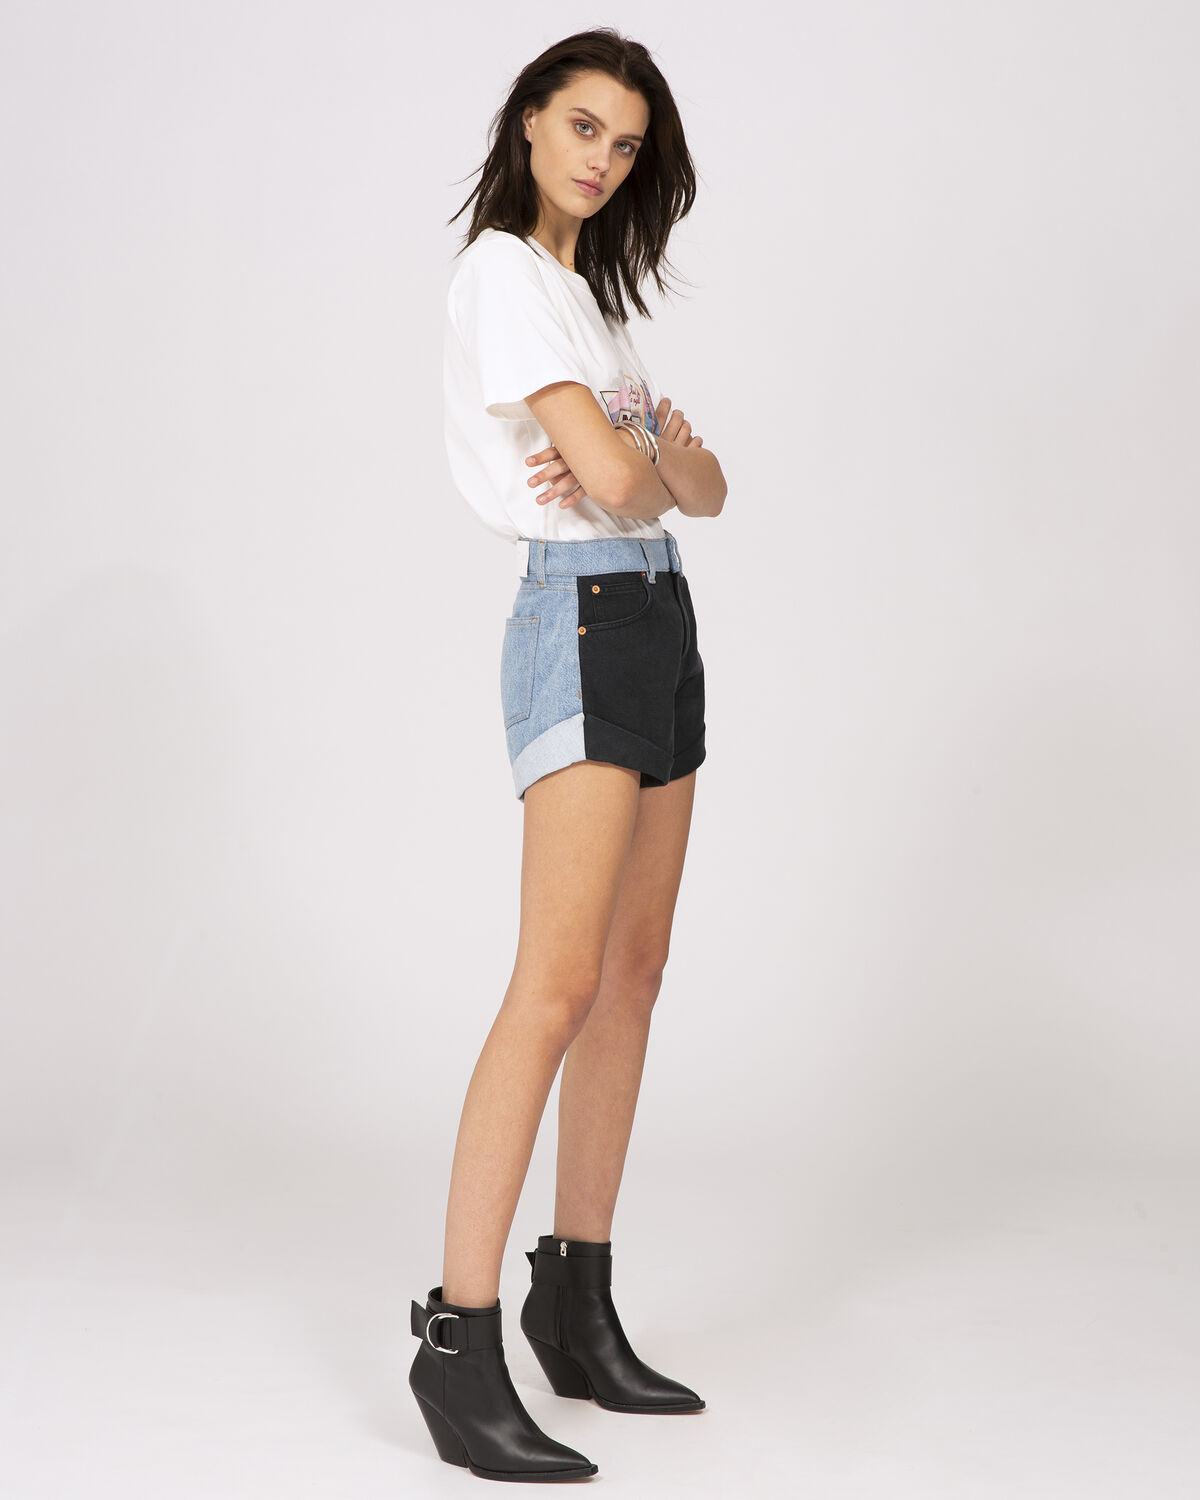 Photo of IRO Paris Willing Shorts Black And Blue Denim - These High Waist Shorts Are Characterized By Their Two-tone Aspect. Comfortable And Stylish, These Shorts Will Become An Essential Part Of Your Summer Dressing And Will Adapt To All Your Outfits, Both Chic And Casual. Spring Summer 19